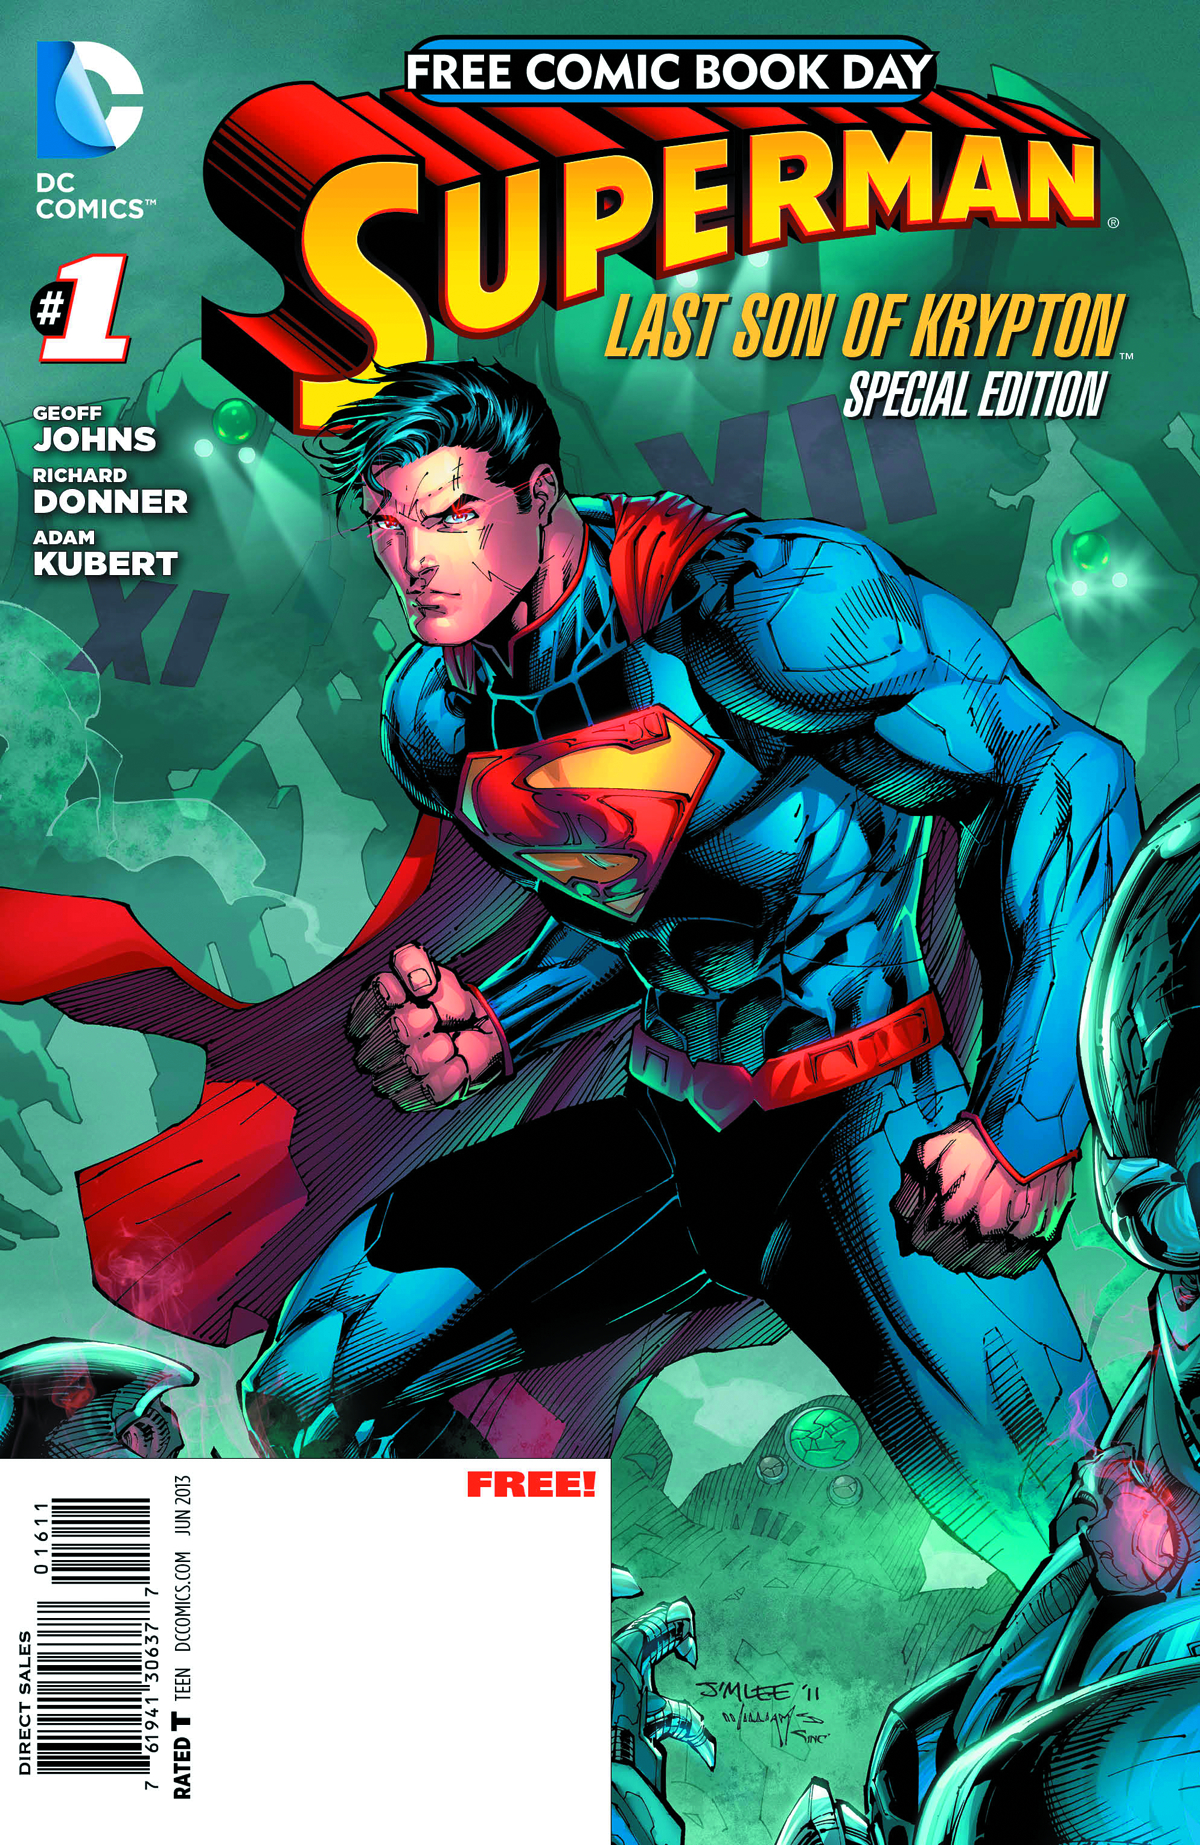 Superman: Last Son of Krypton #1 cover, free comic book day edition. Superman standing against rumble. 